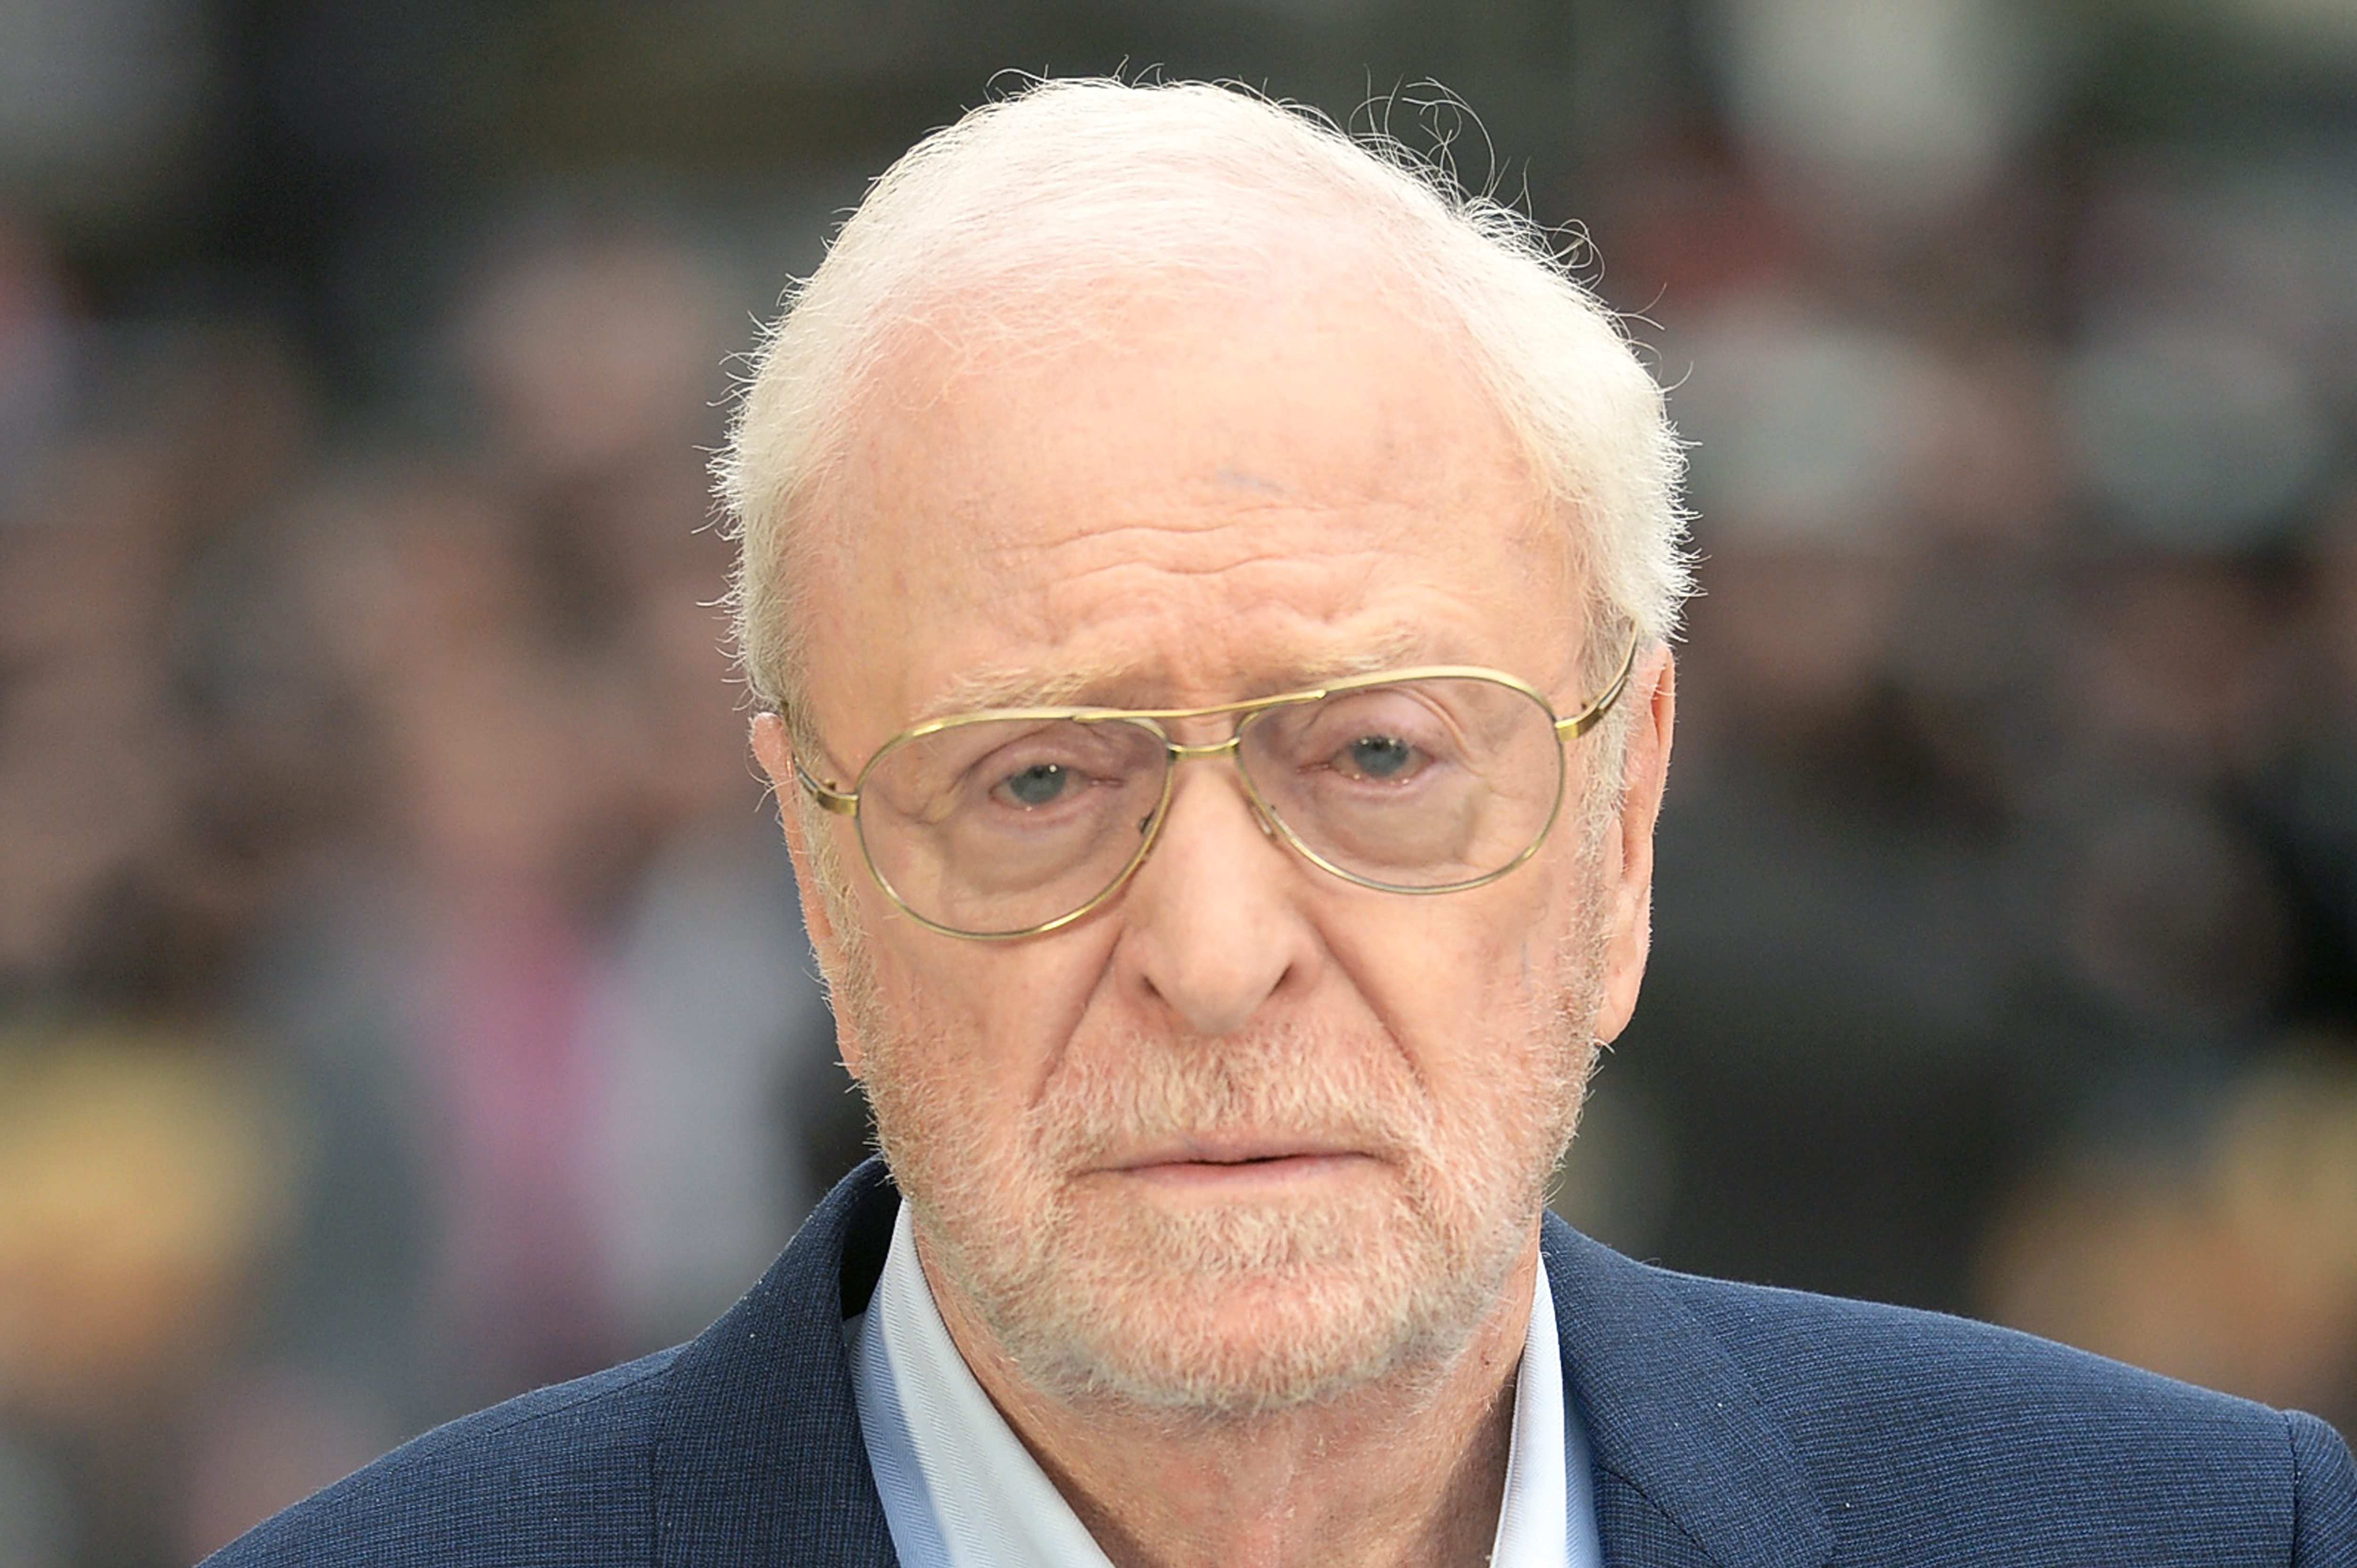 Sir Michael Caine attends the World Premiere of 'King Of Thieves' at Vue West End on September 12, 2018 in London, England. | Source: Getty Images